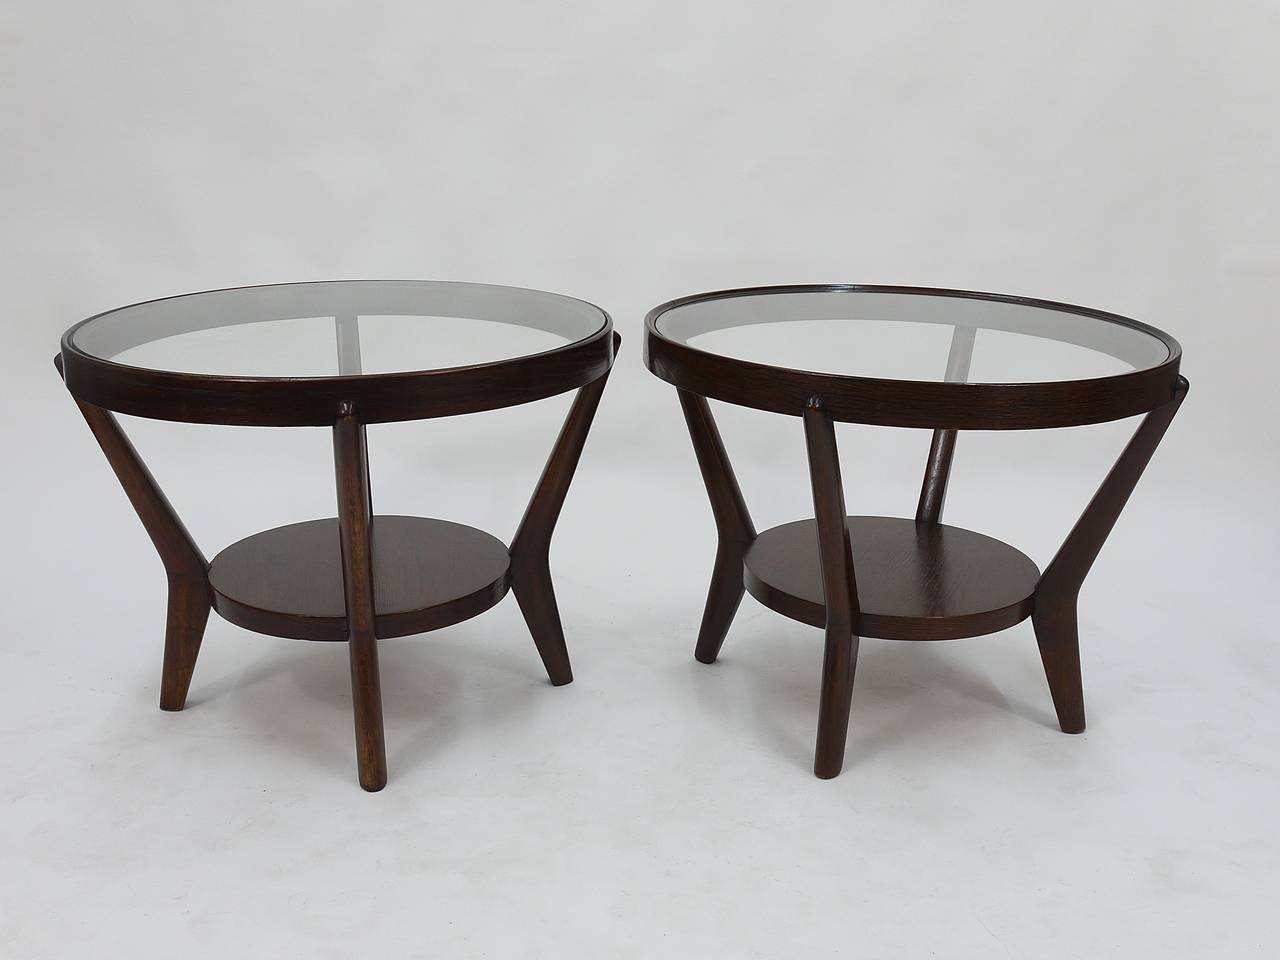 Two very beautiful and elegant round table with glass top, designed in the 1930s by Jindrich Halabala, who worked for Gropius at the Bauhaus. To use as a coffee or side table. In excellent condition. Two matching tables available, price per piece.